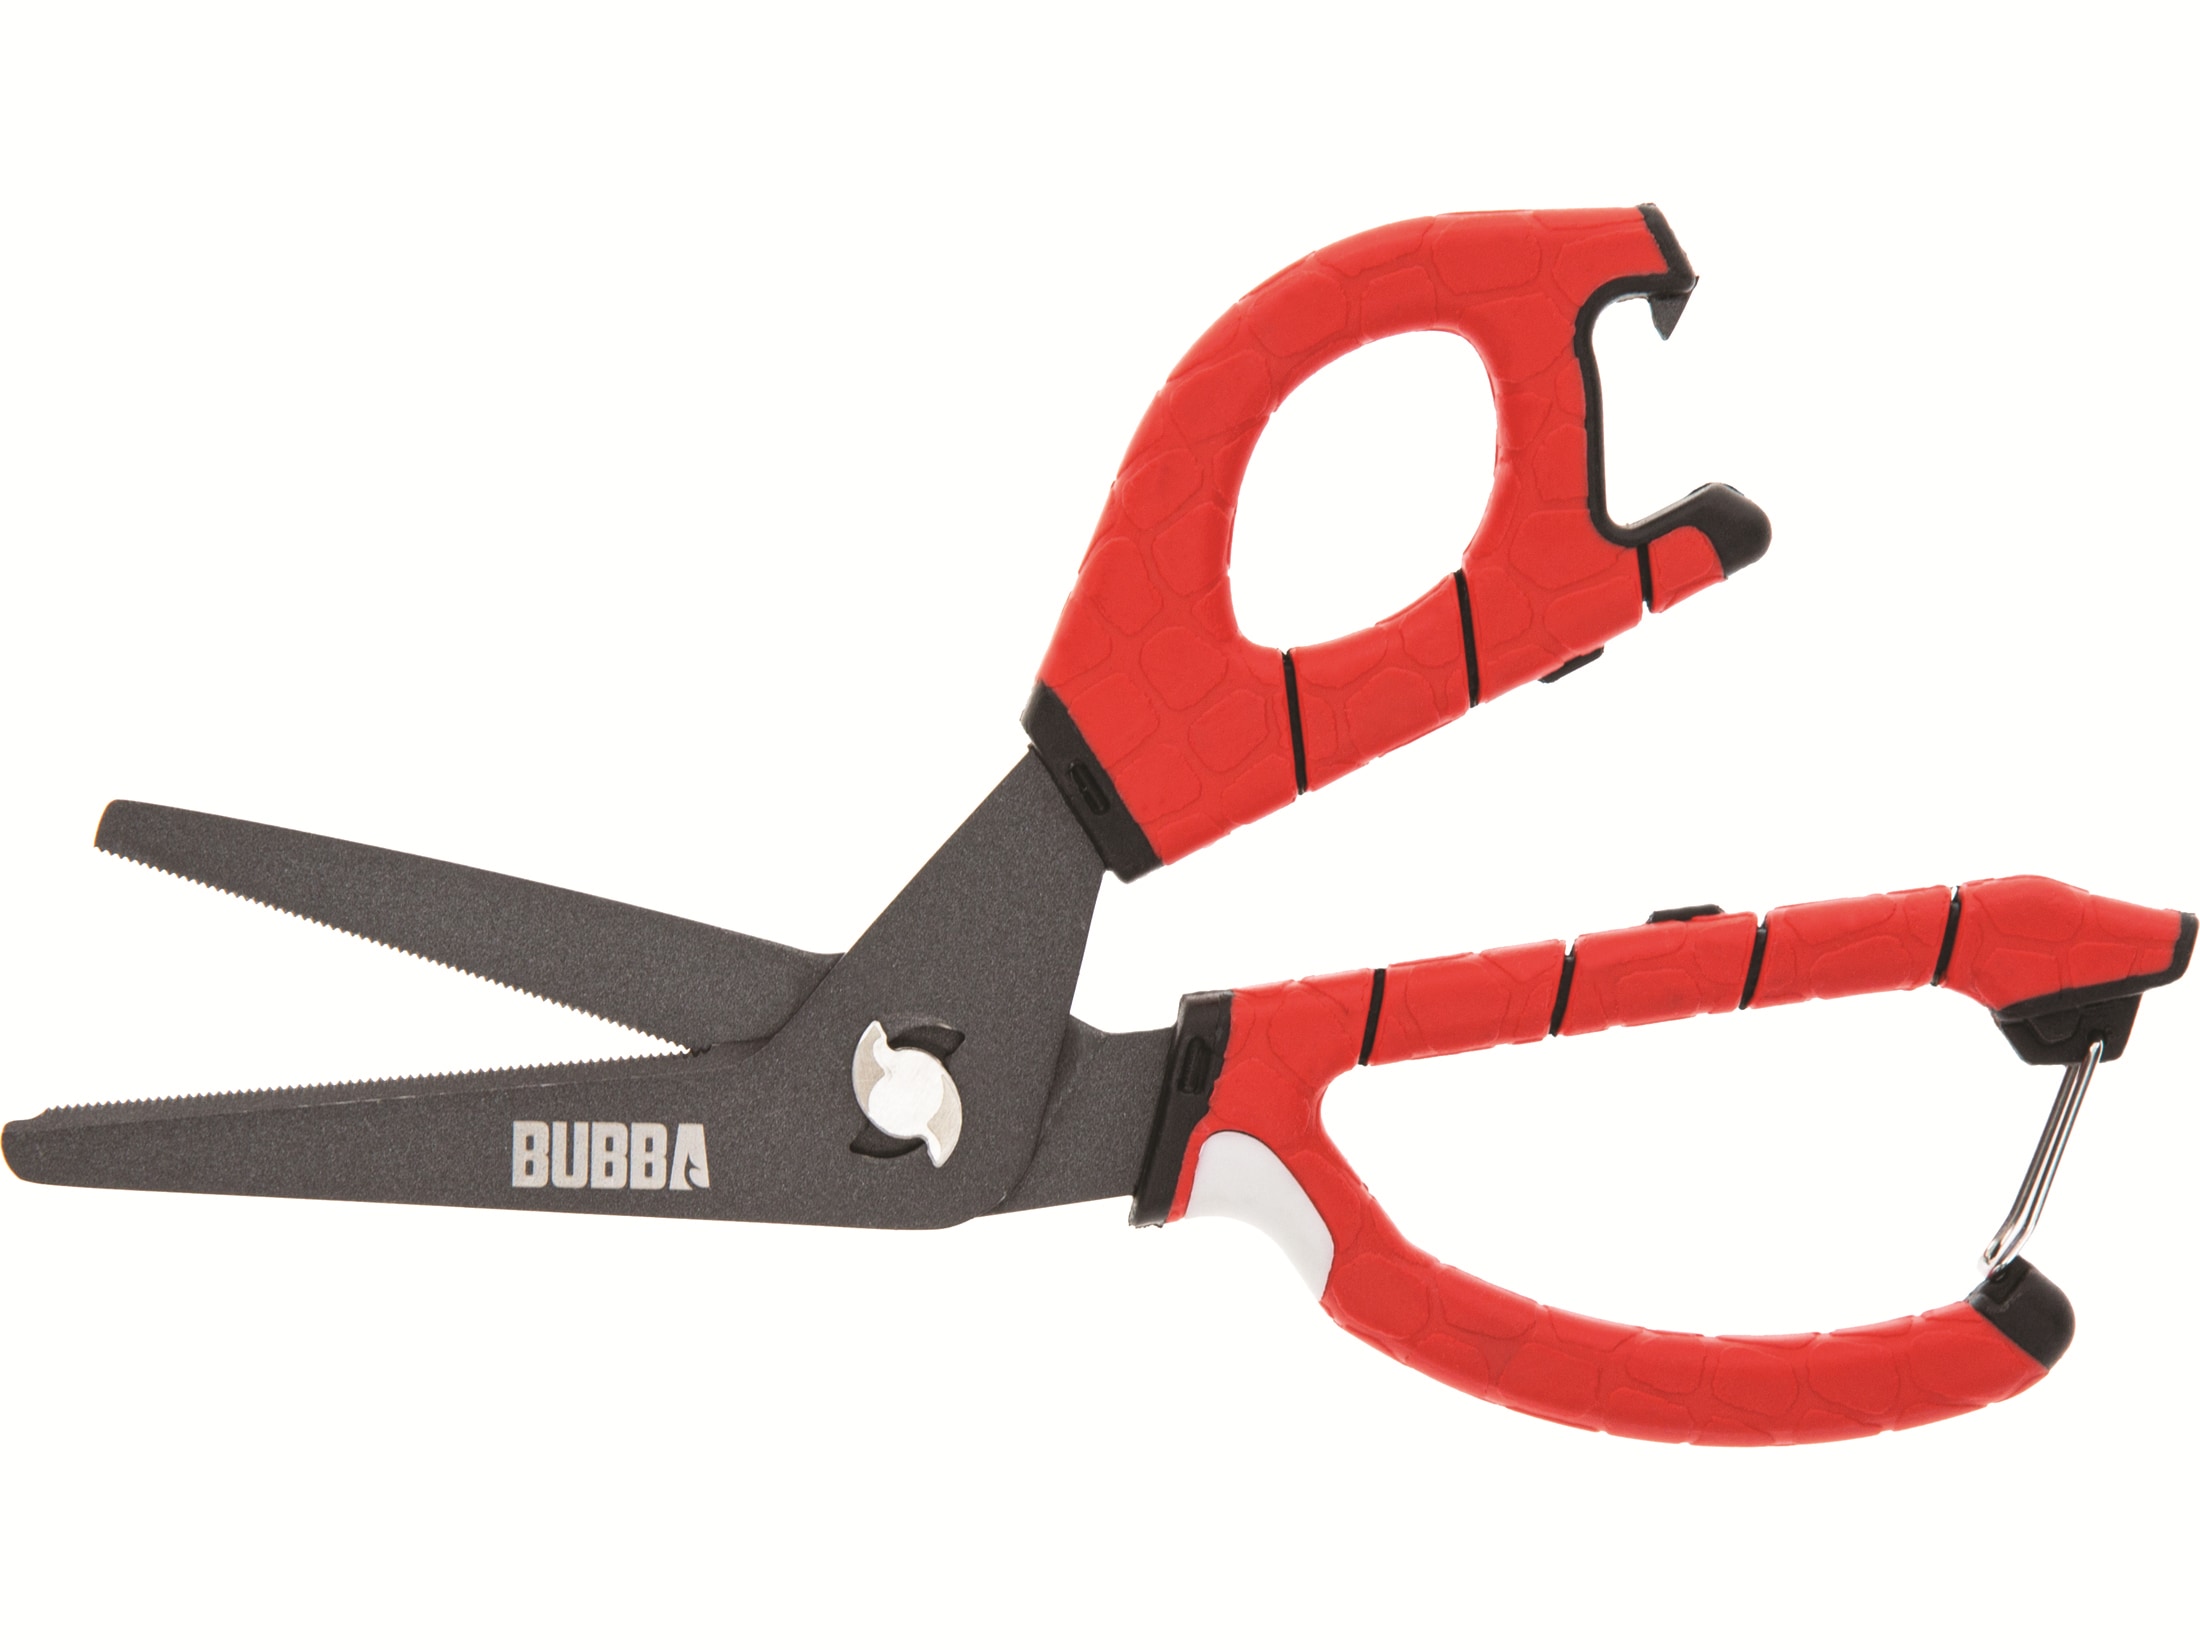 Bubba Shears Large Polymer Handle Red For Sale